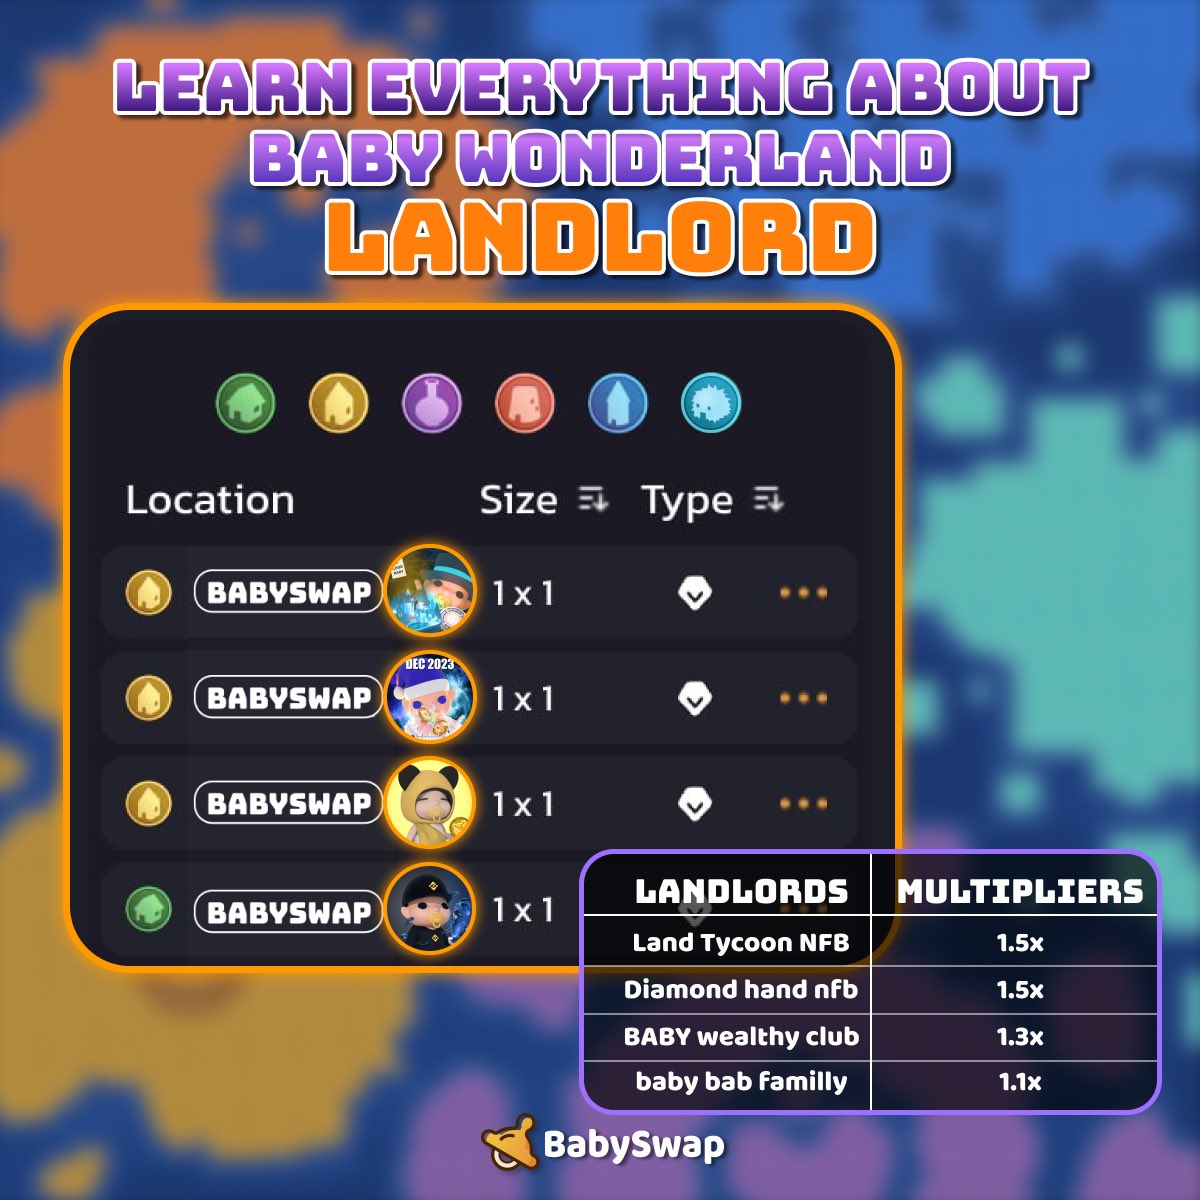 Maximize your $BABY income from #BabyWonderland by signing the premium Baby #NFTs as Landlords 👑

Not just adding a few hundred Prosperity Points, but increasing exponentially! 🥳

Sign all your lands with the Landlord each for the greatest output NOW 👉🏻land.babyswap.finance/myland